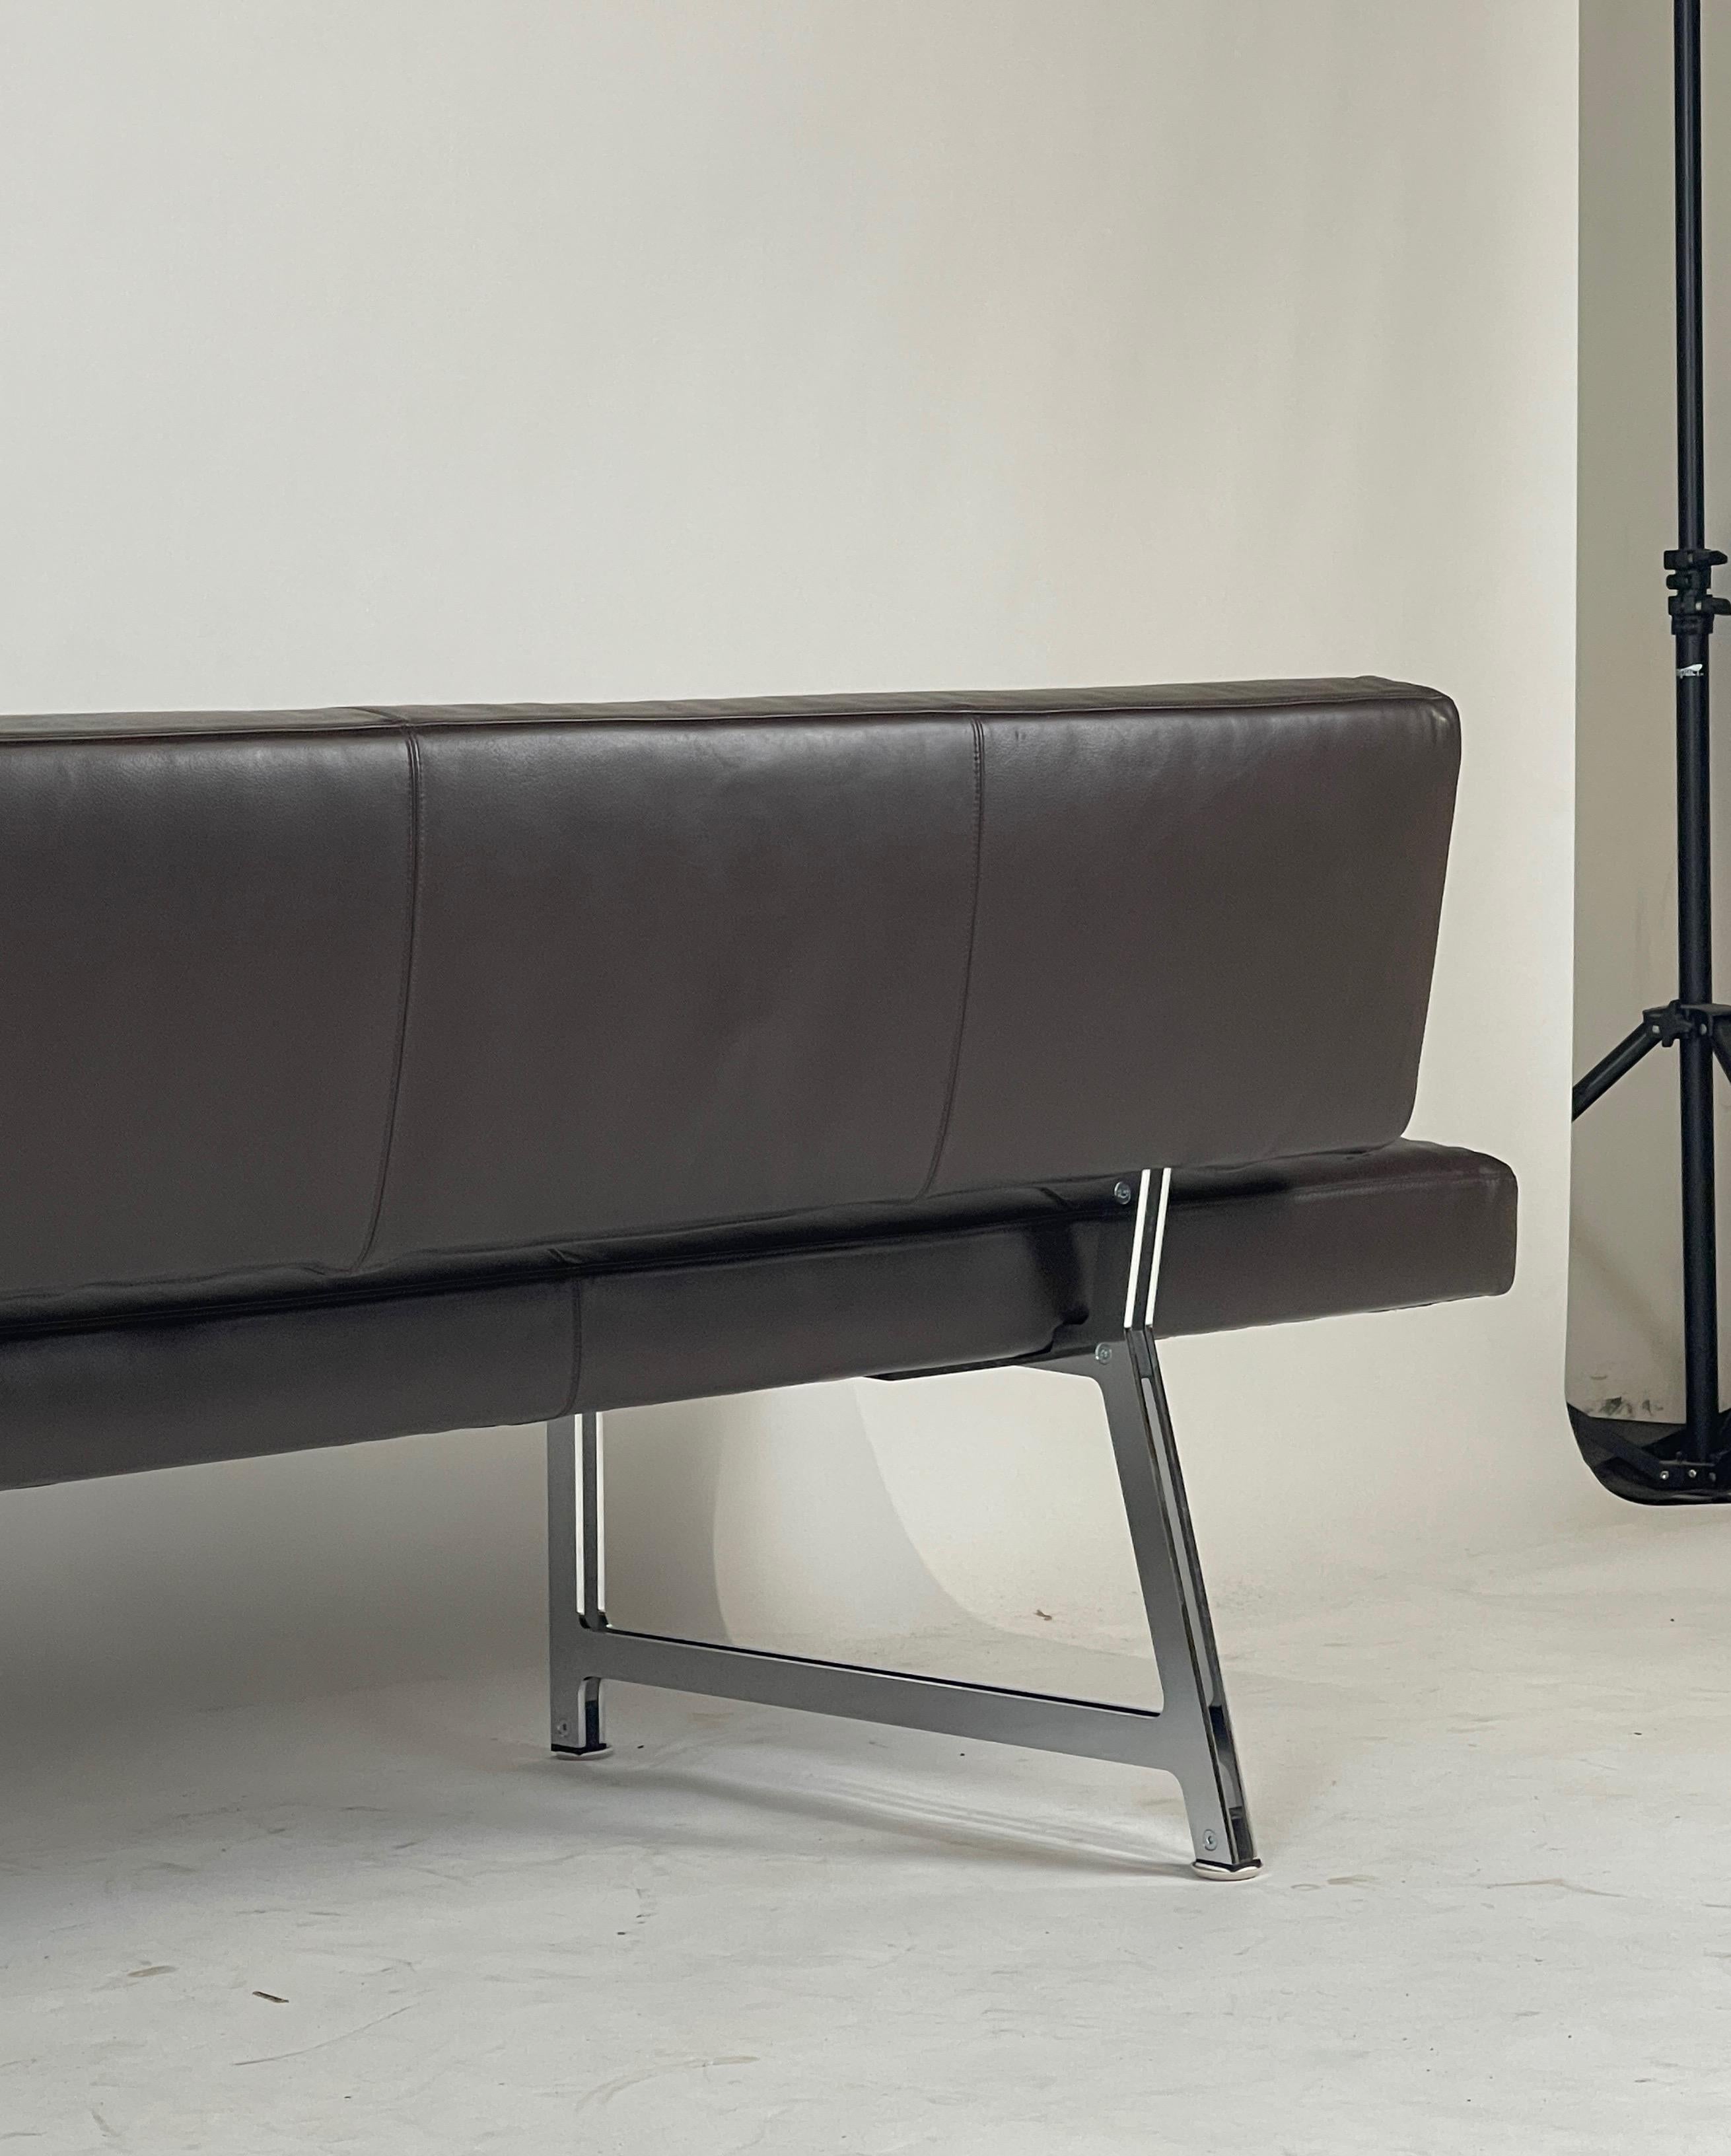 Sleek Norman Foster for Walter Knoll Leather Sofa / Daybed 'Foster 510' 11